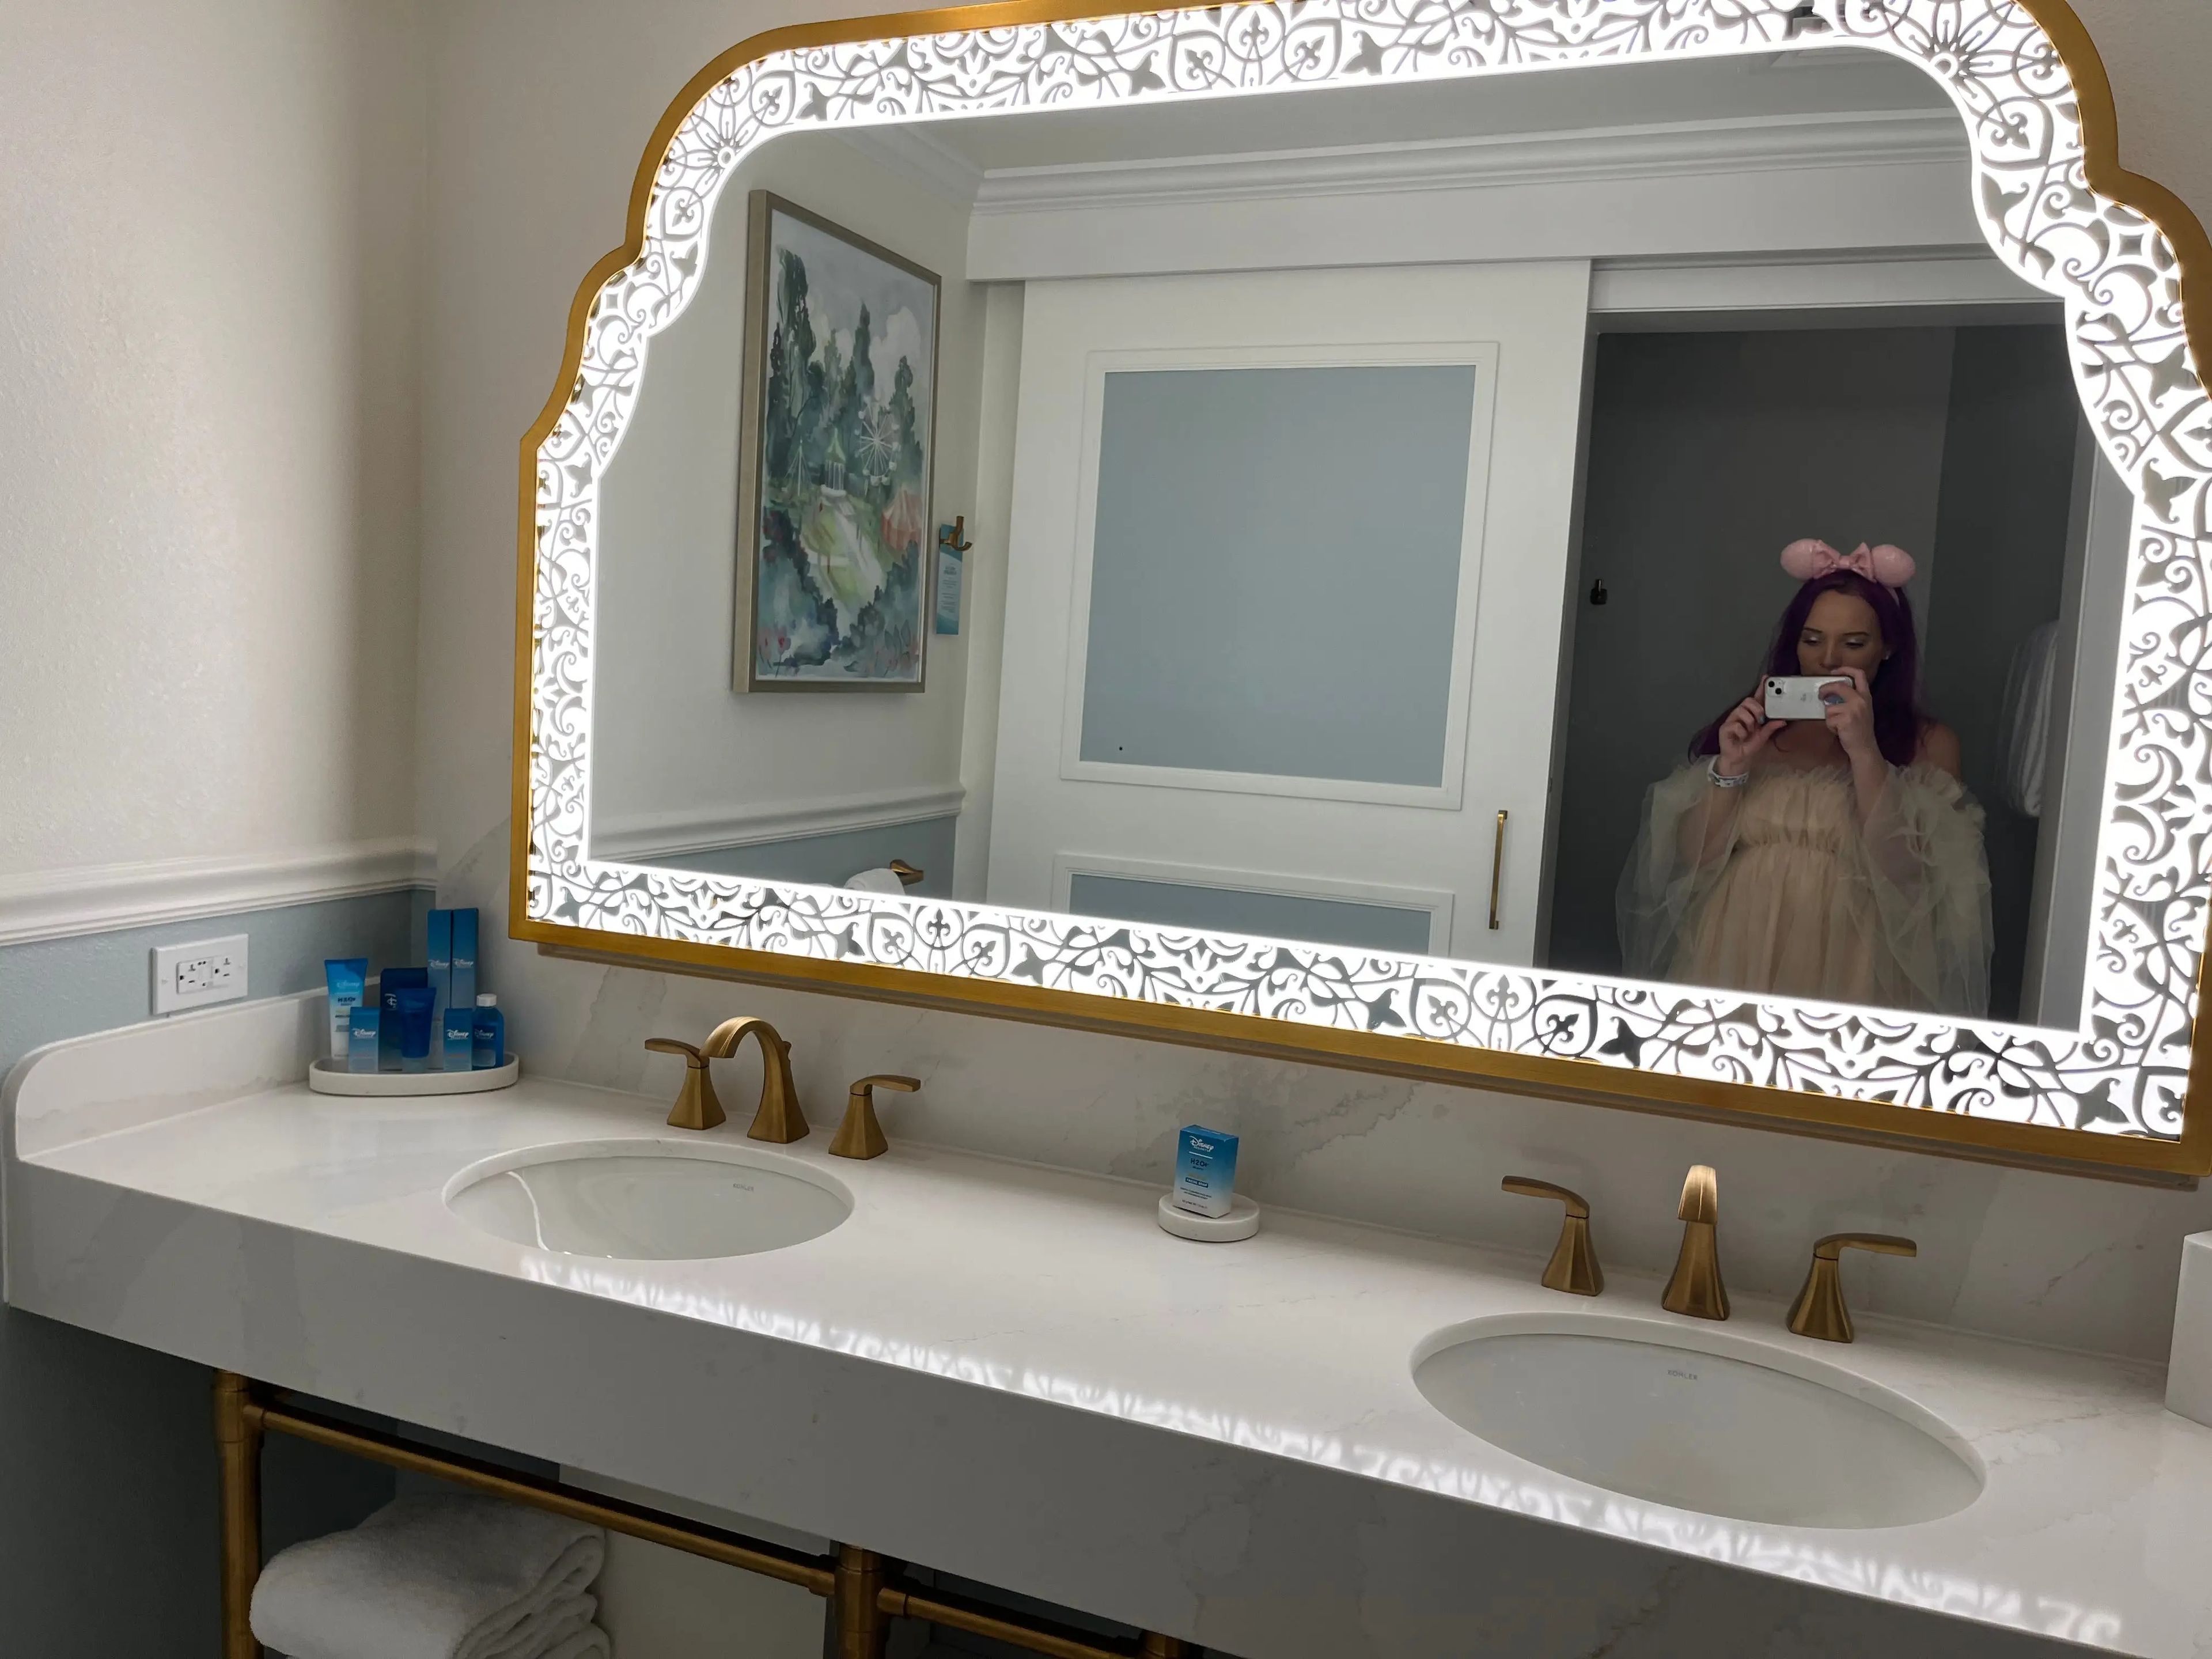 jenna taking a mirror selfie in the big double vanity in the bathroom inside a room at the grand floridian